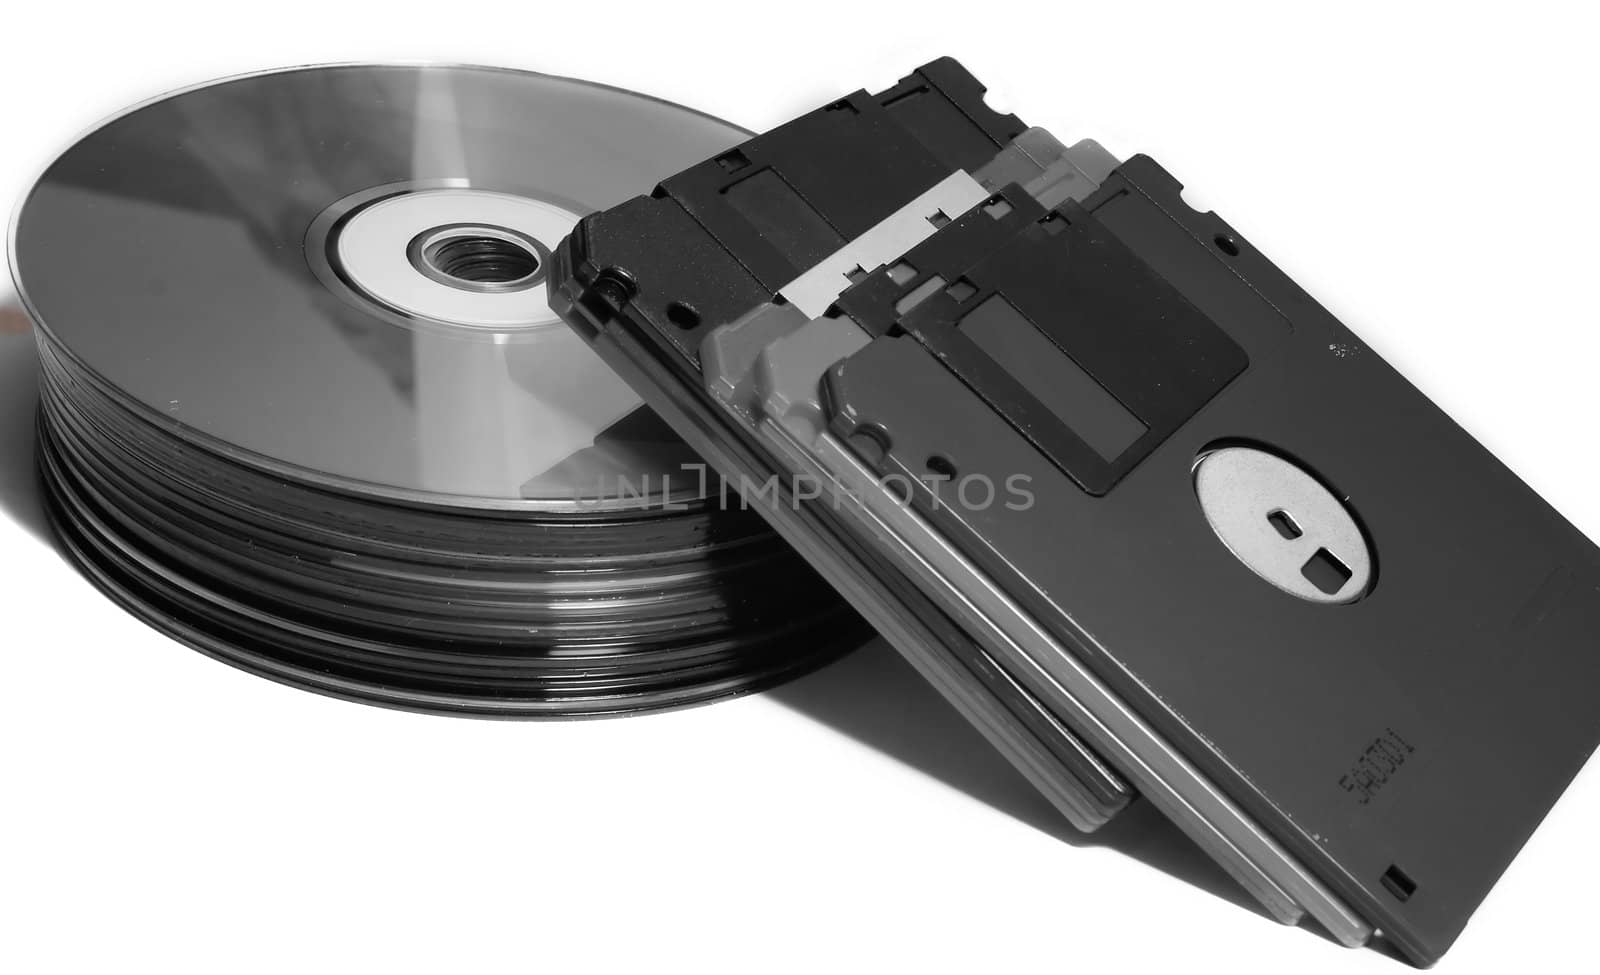 CD with diskette. by nigerfoxy